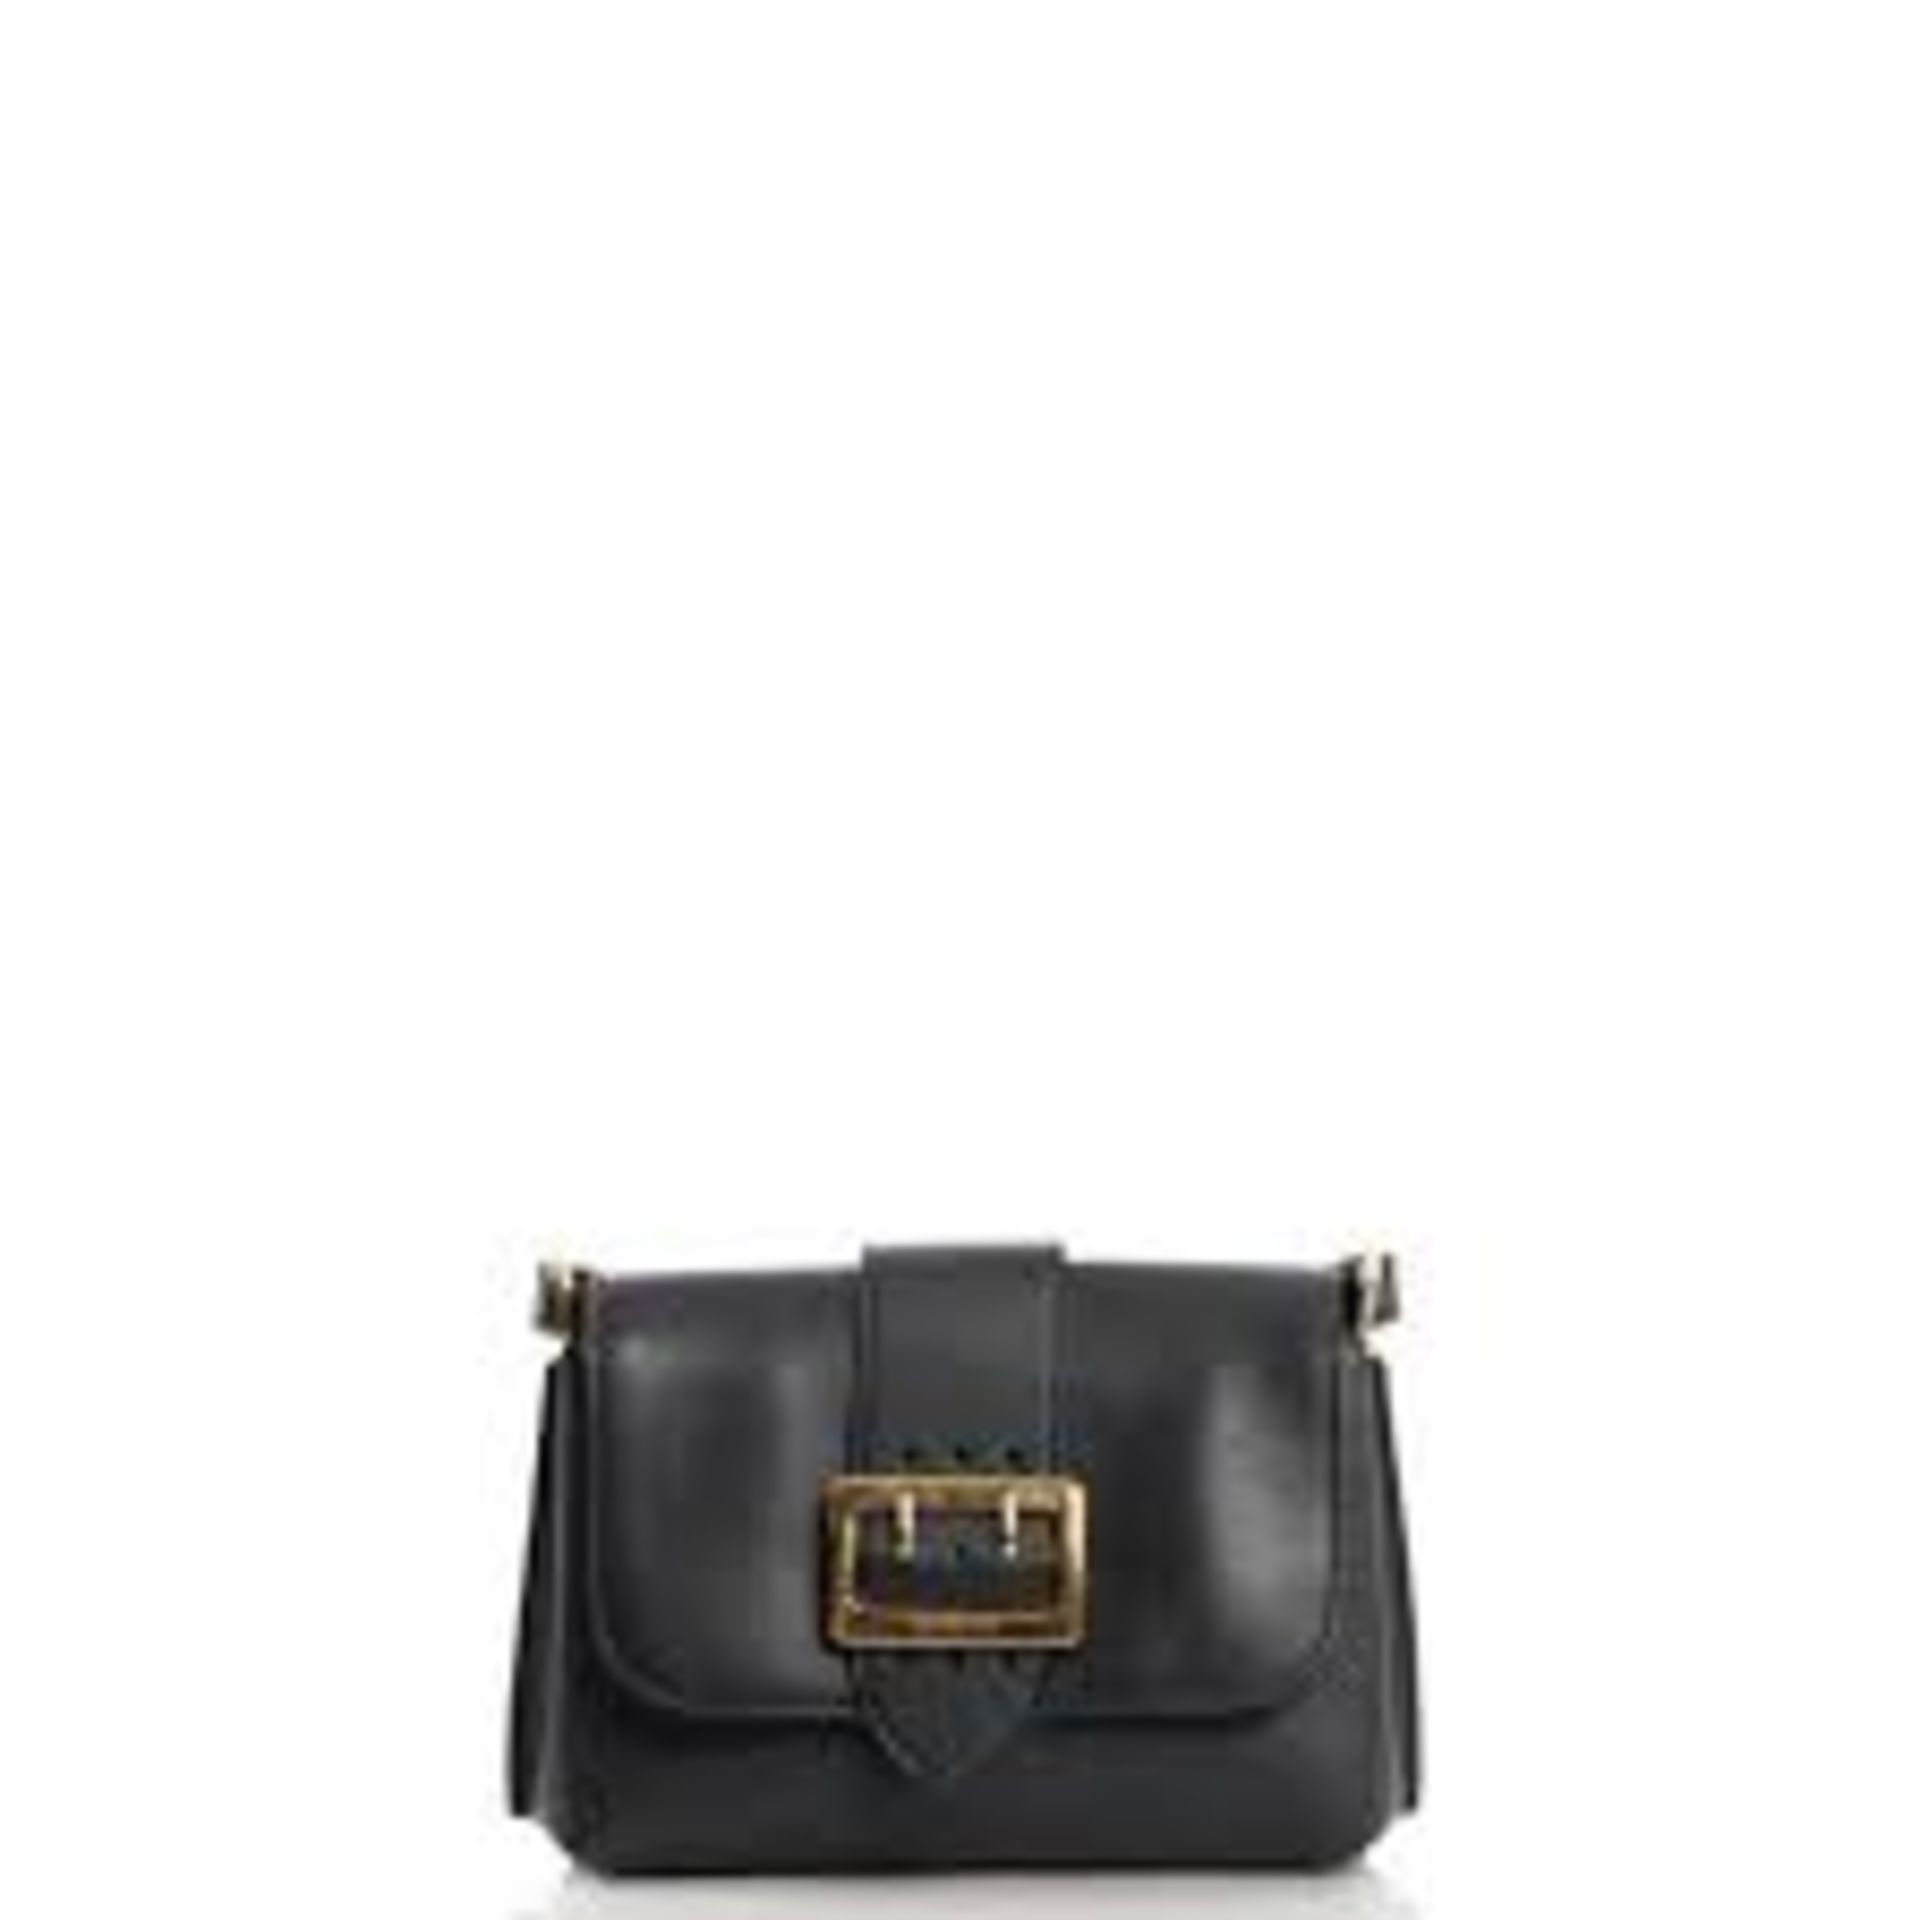 Burberry The Small Leather Buckle Bag in Black 20x18cm. (10.21)